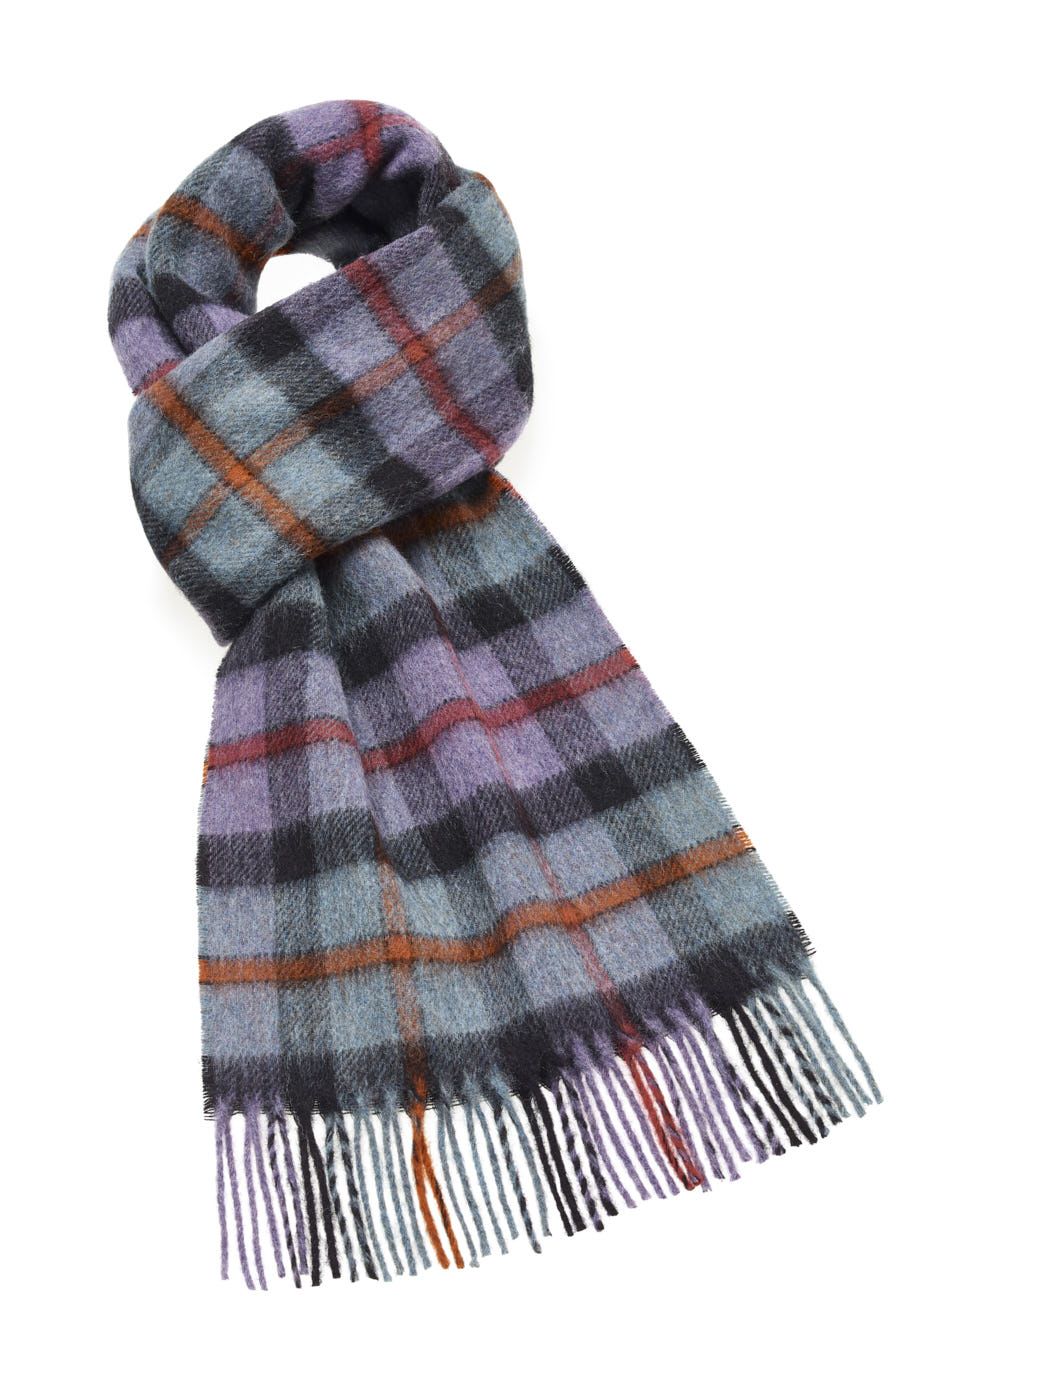 Elstow Thistle Scarf - Merino Lambswool - Made in England